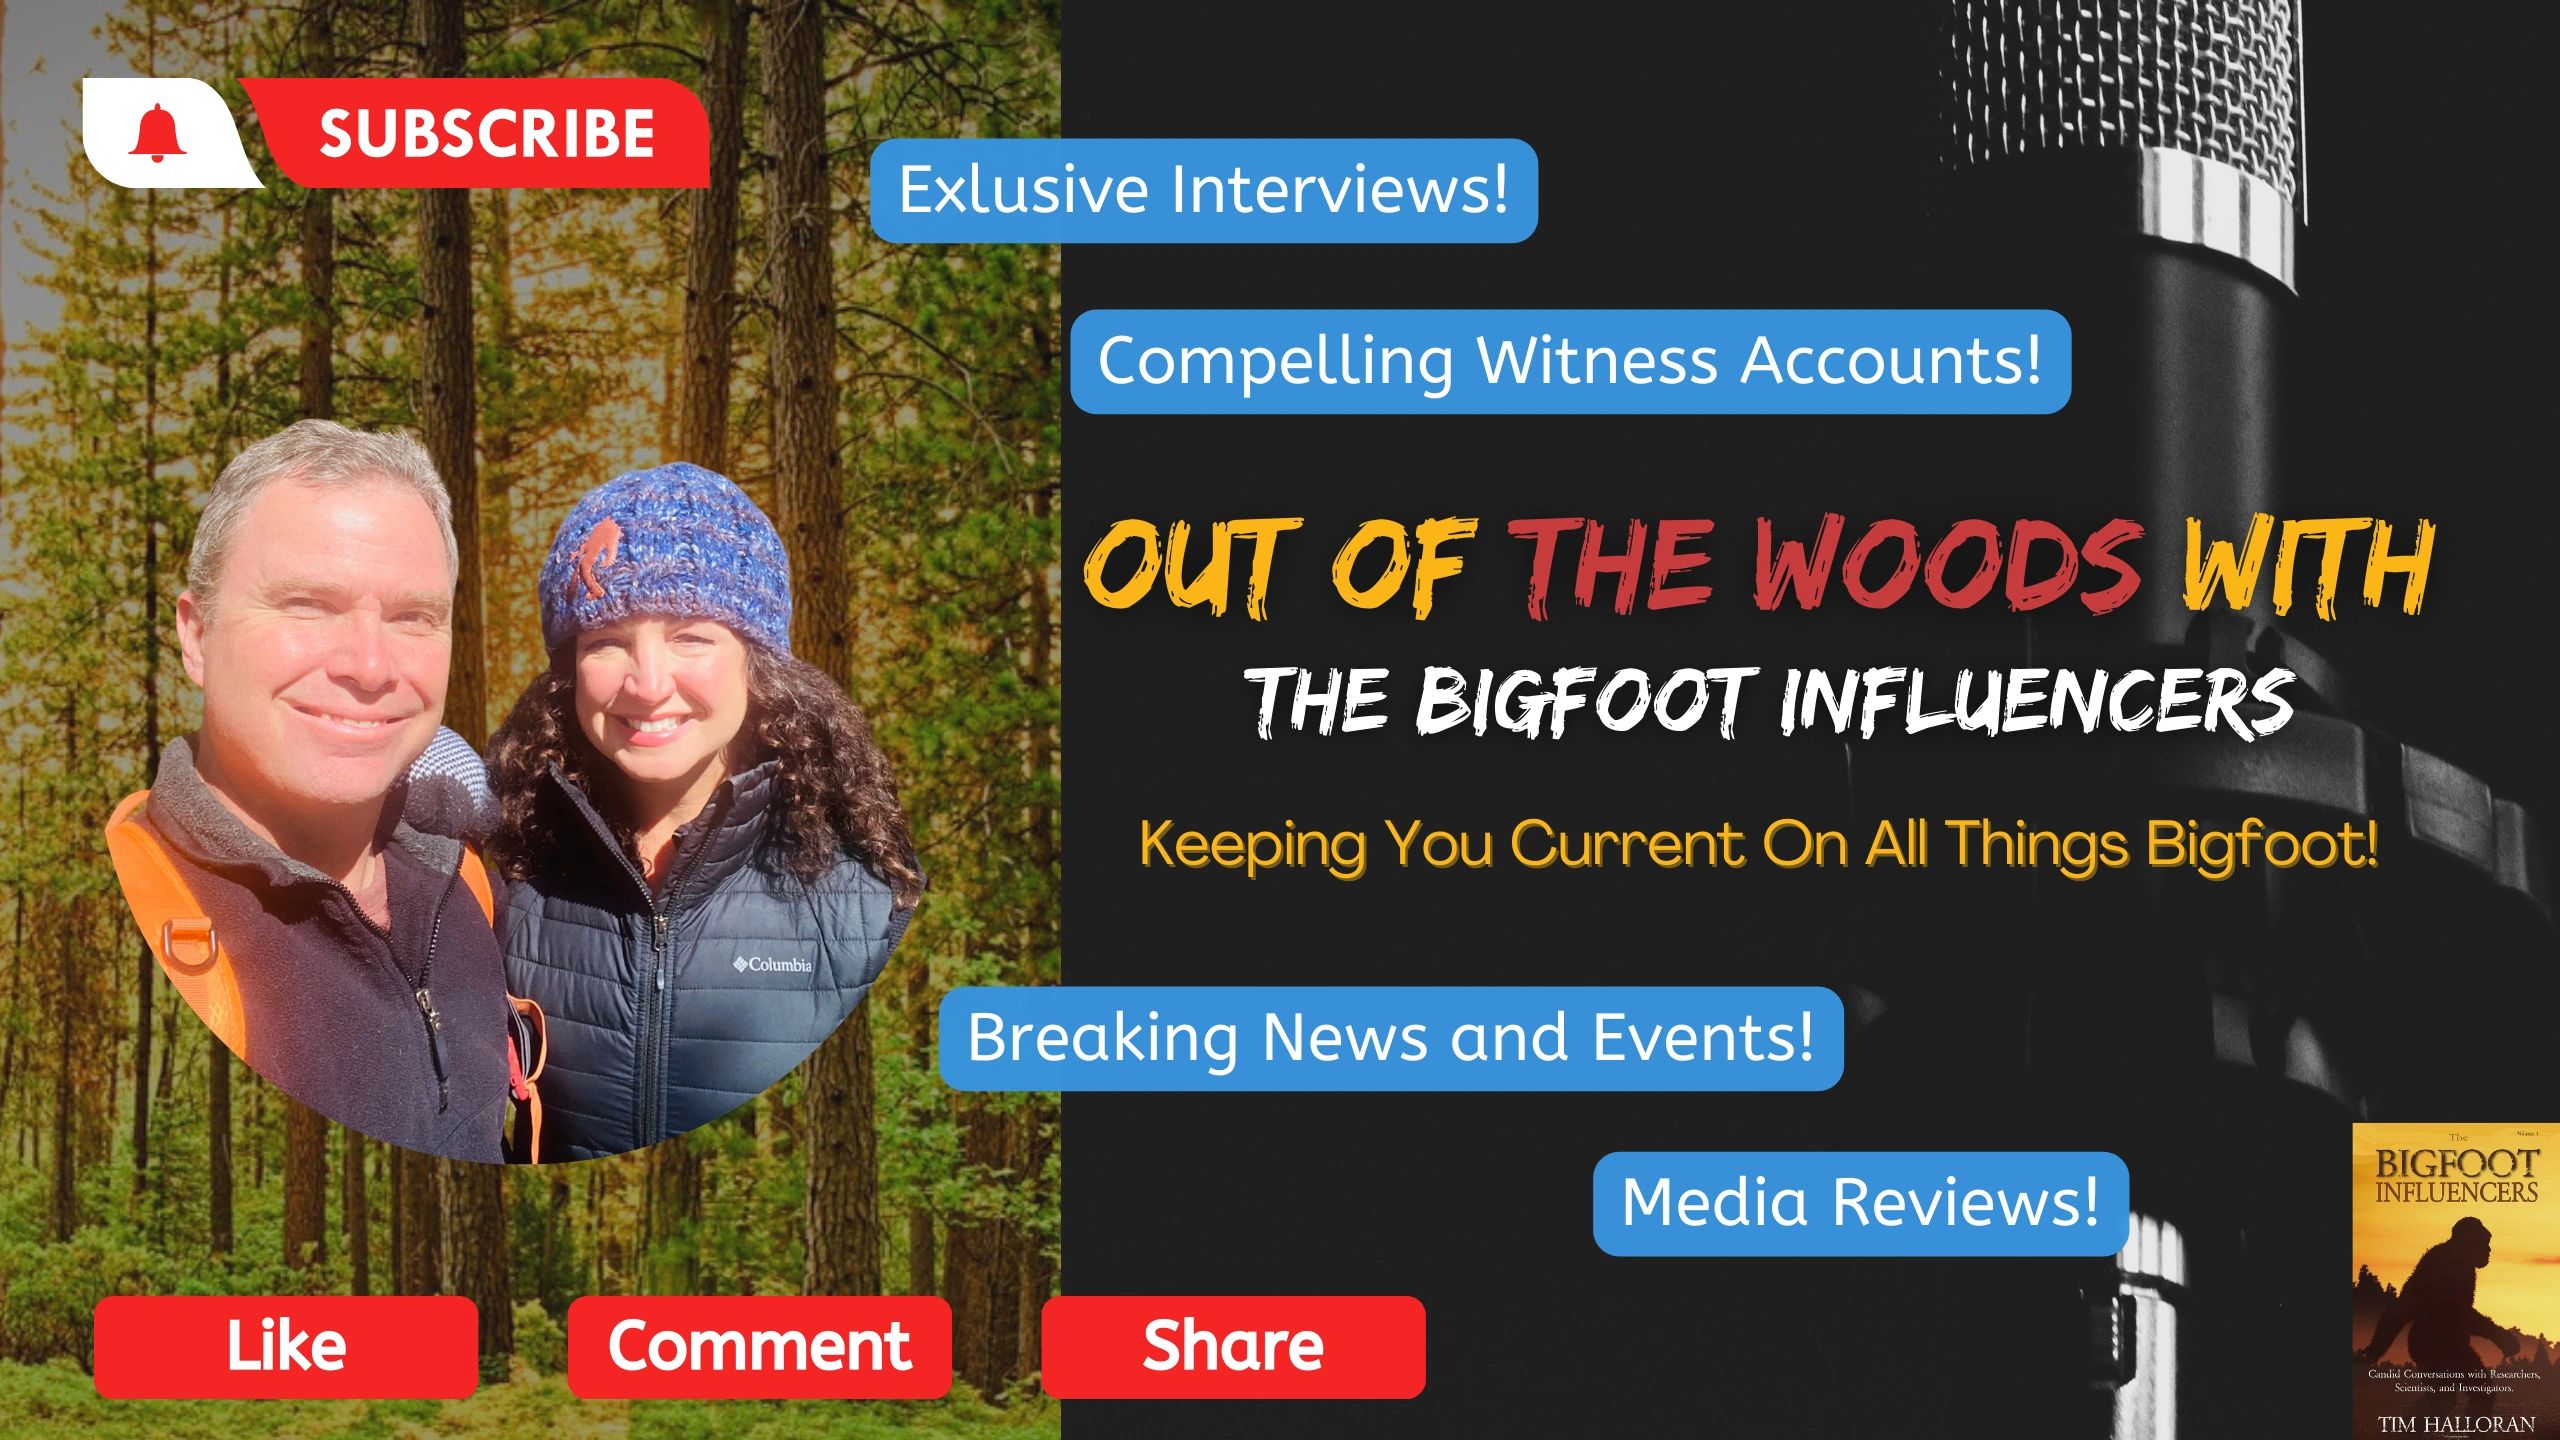 Join the show!
Audio: 
https://www.spreaker.com/show/out-of-the-woods-the-bigfoot-influencers
YouTub